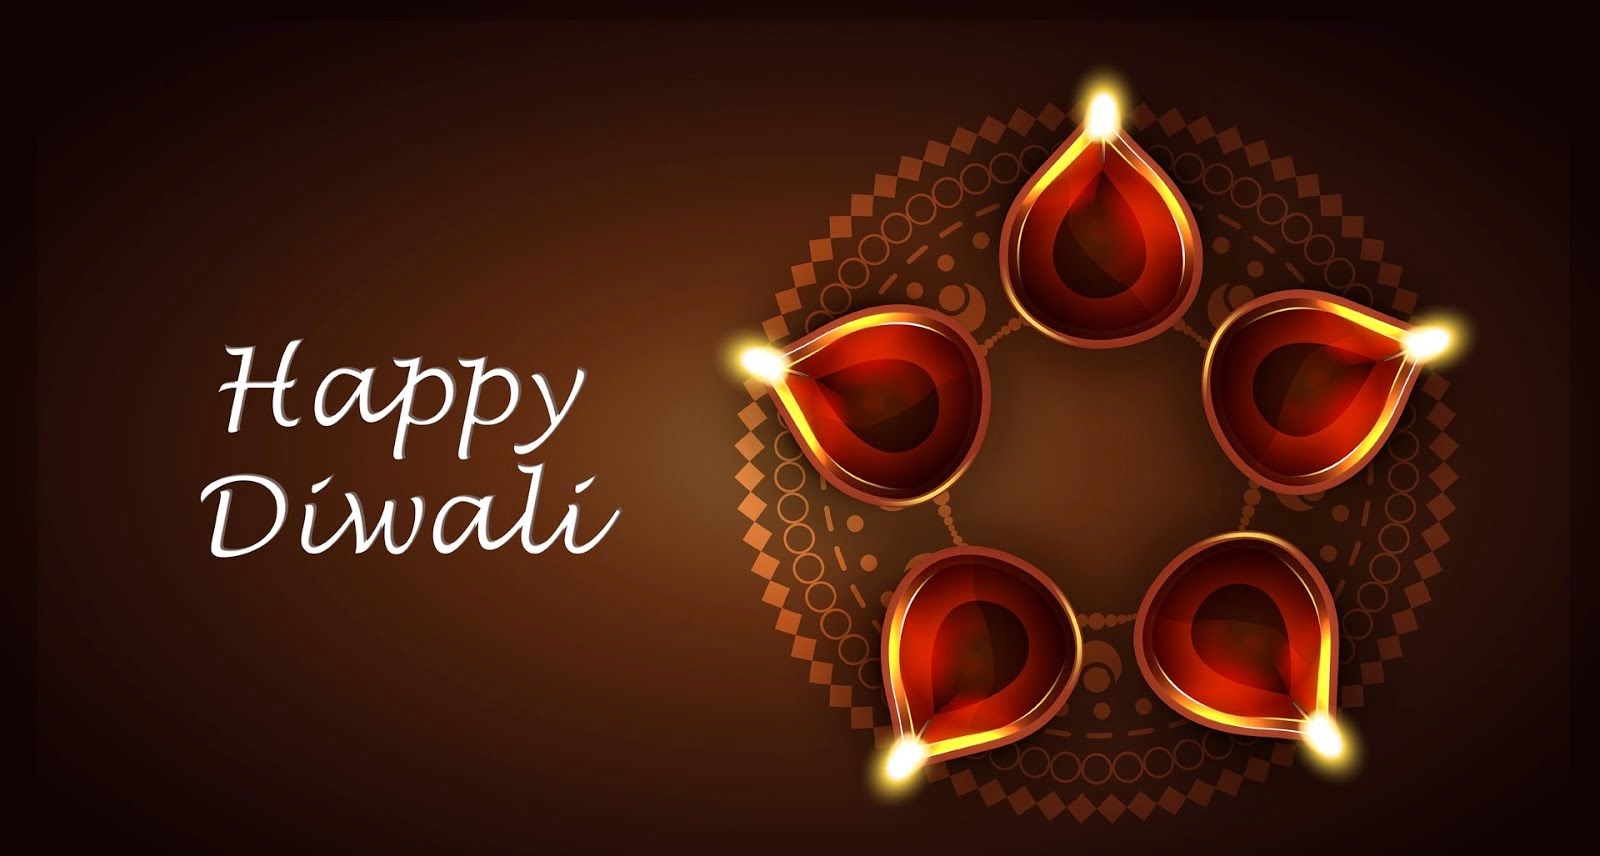 Happy Diwali Animated Images 2019 - 1600x856 Wallpaper 